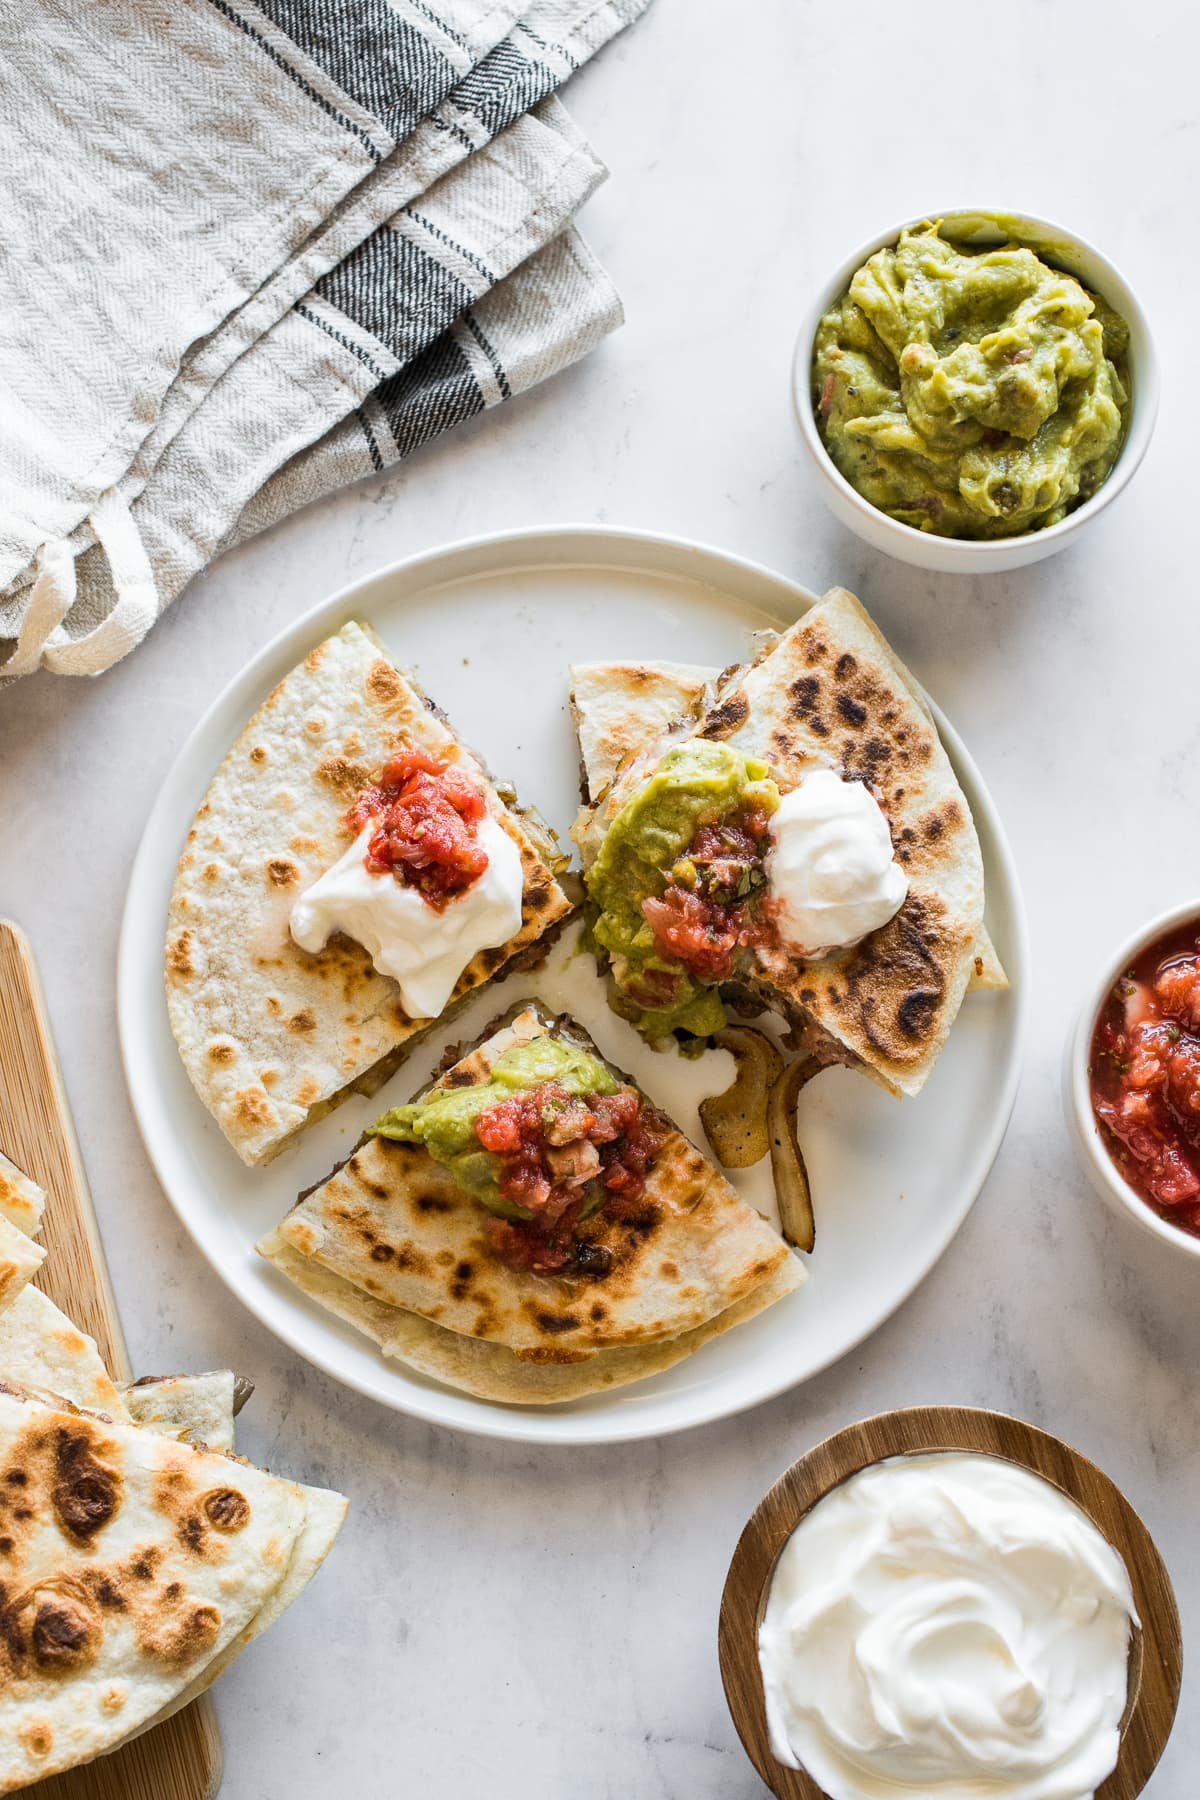 A steak quesadilla topped with sour cream, salsa, and guacamole.